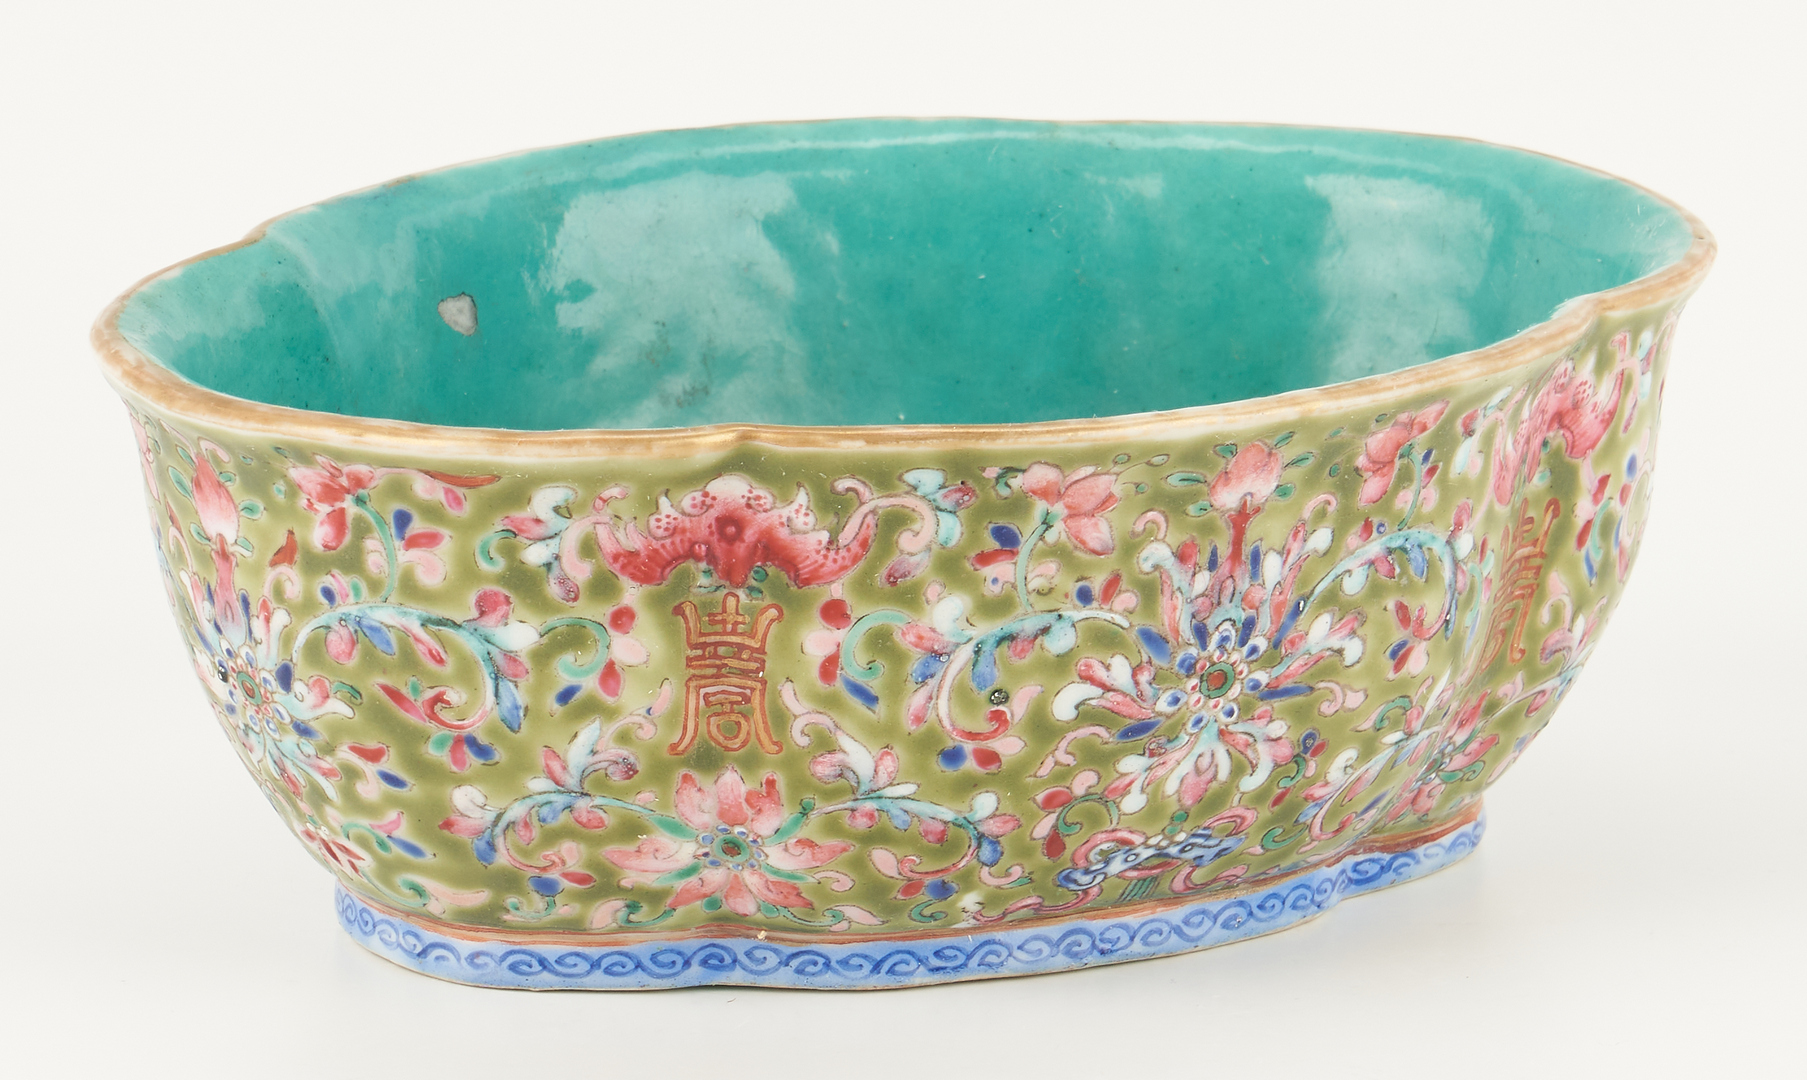 Lot 33: Chinese Famille Rose Quatrefoil Bowl w/ Stand